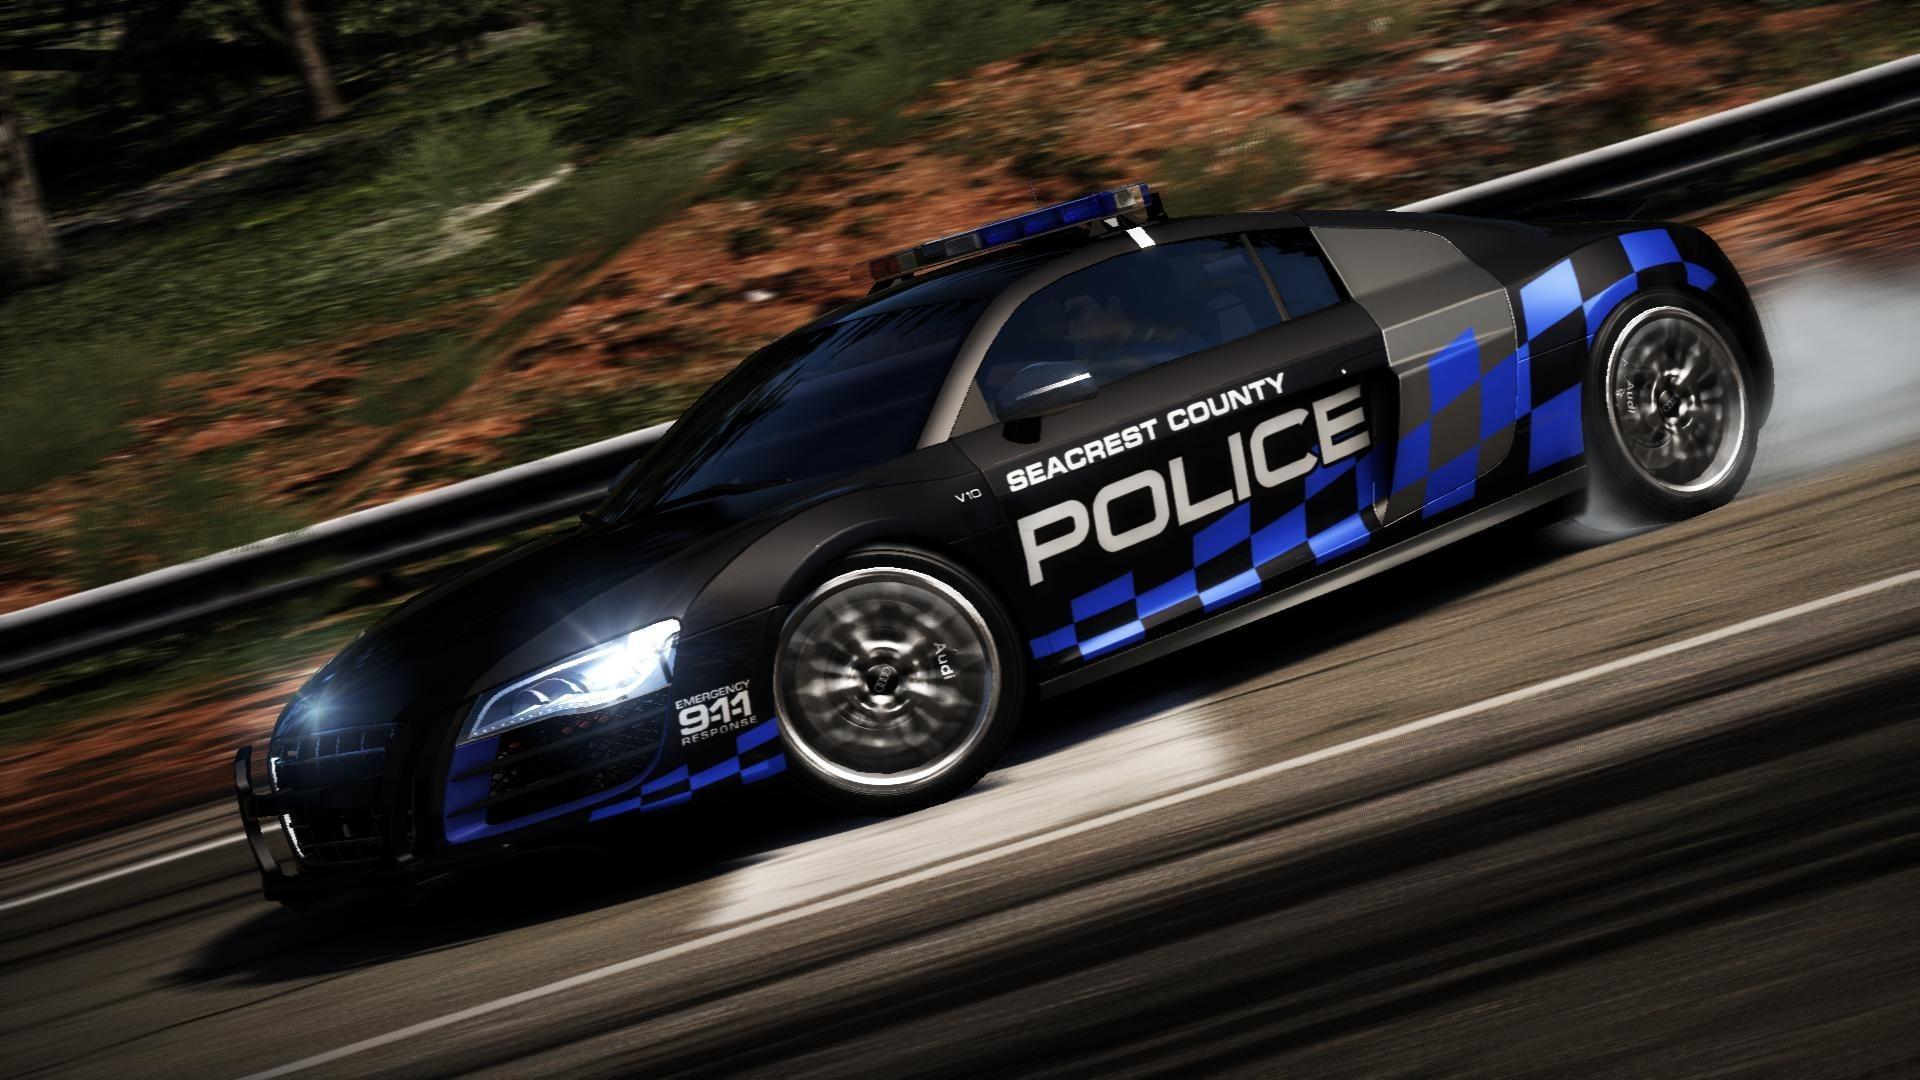 Speed hot pursuit cars pc games police wallpaper